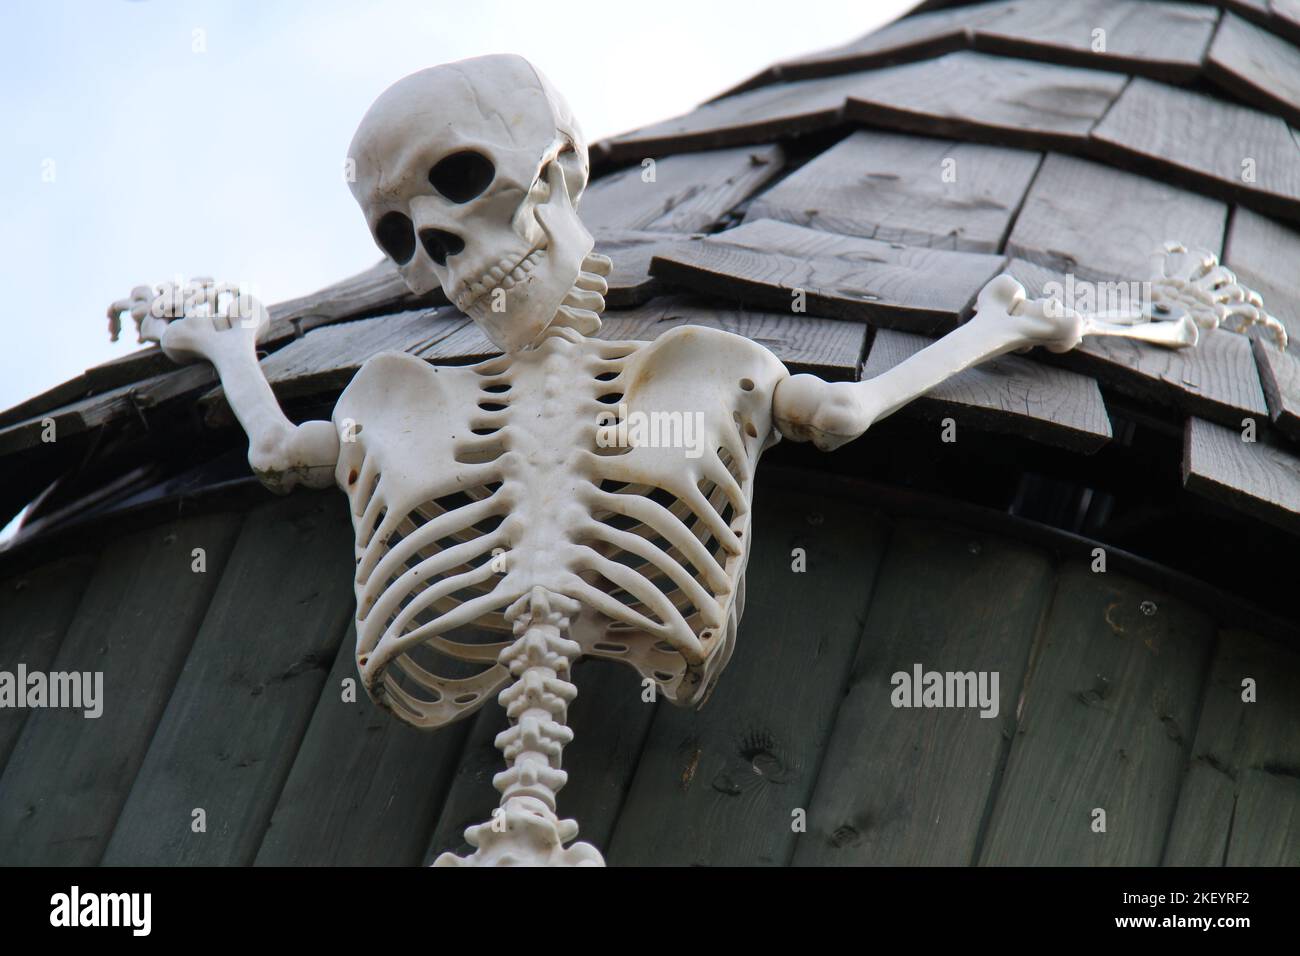 A Skeleton Figure Hanging from a Building Roof. Stock Photo